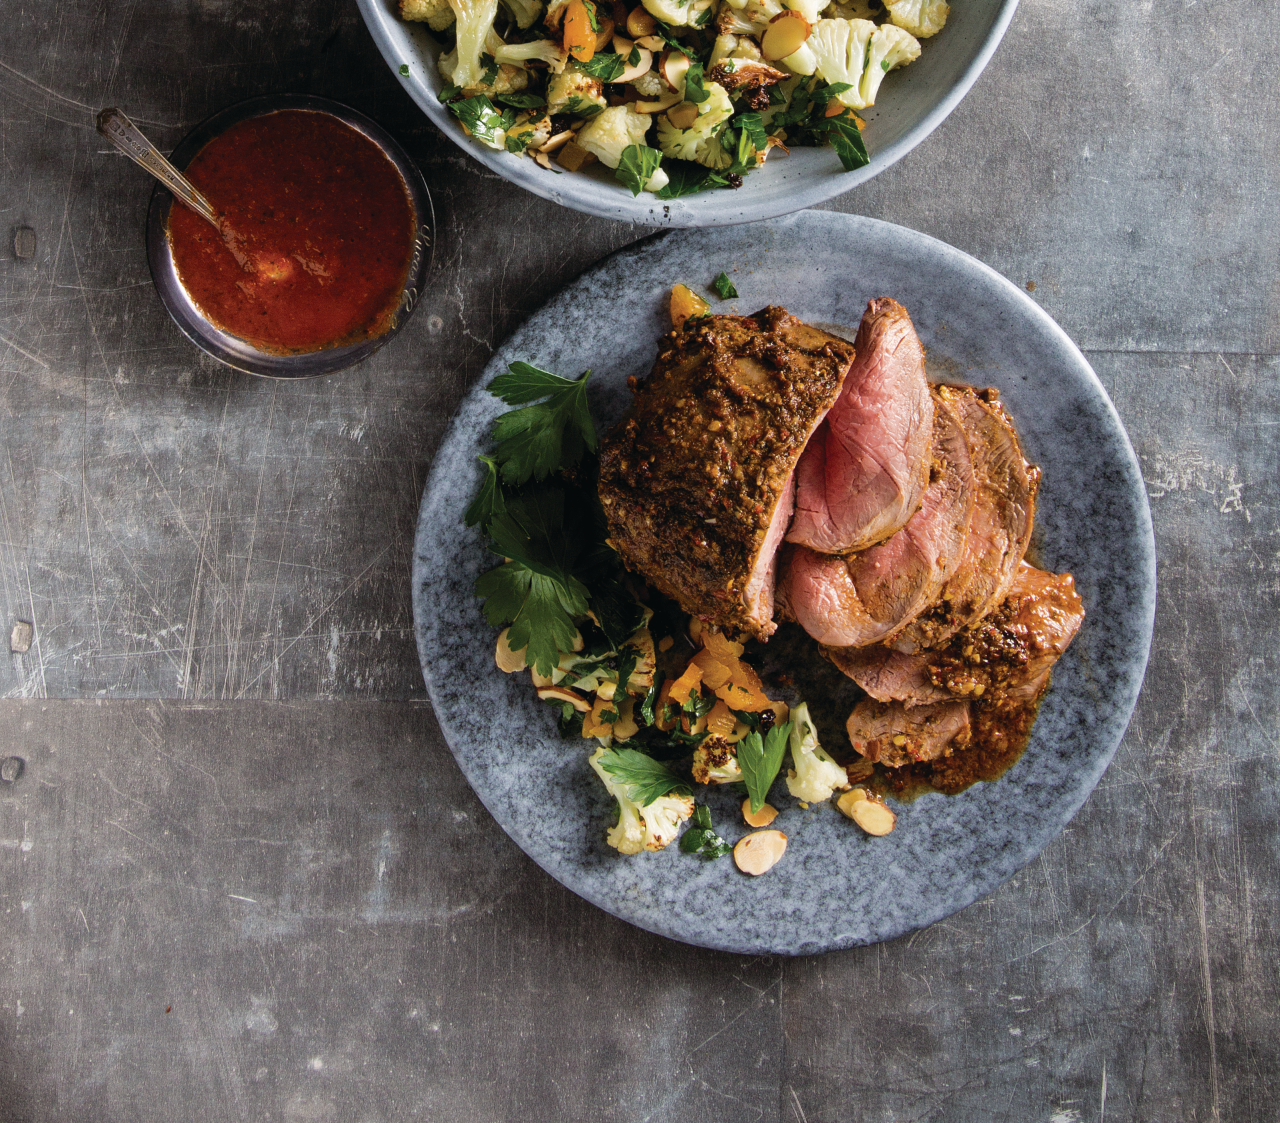 Middle Eastern Spice Rub
Lamb Recipes from Mindfood. Issue September 2017